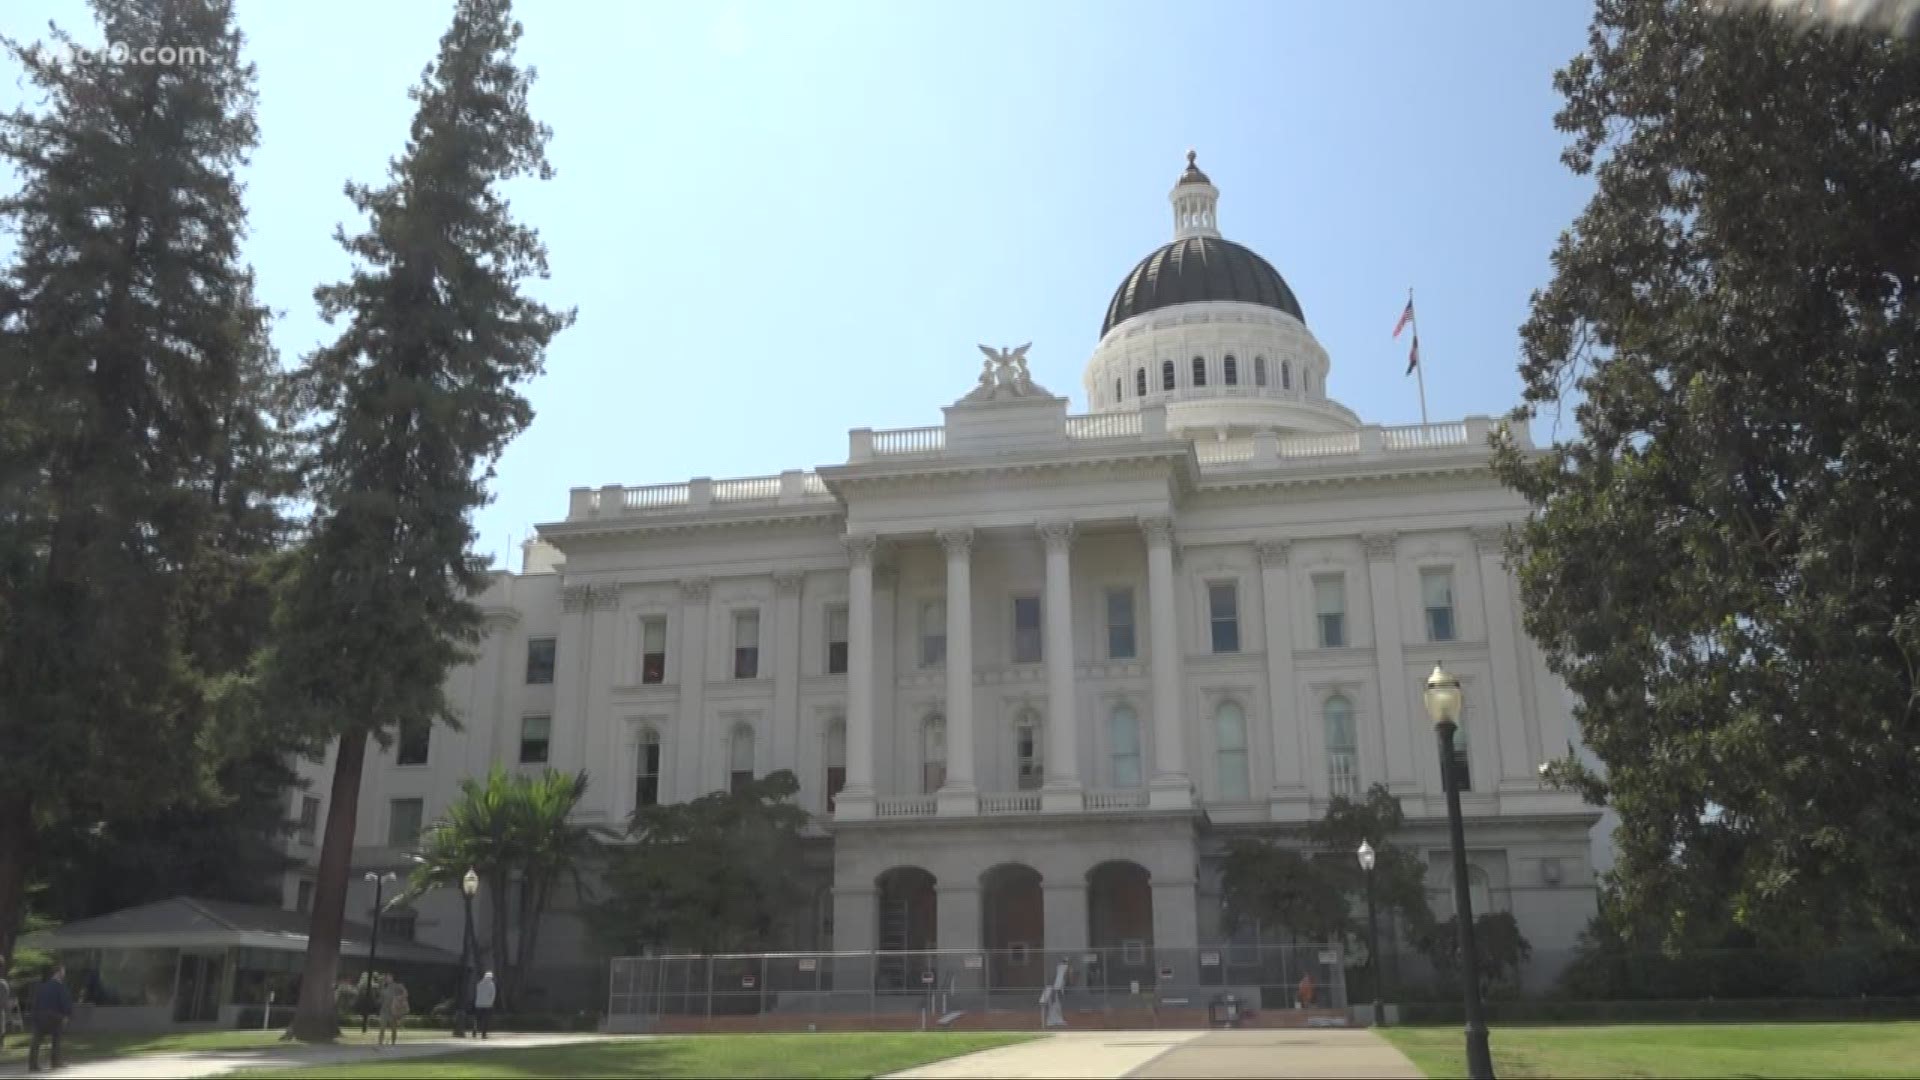 Groundskeepers at the Capitol have reported being punched, scratched, and having their hair pulled during encounters with the homeless who sleep in public places.